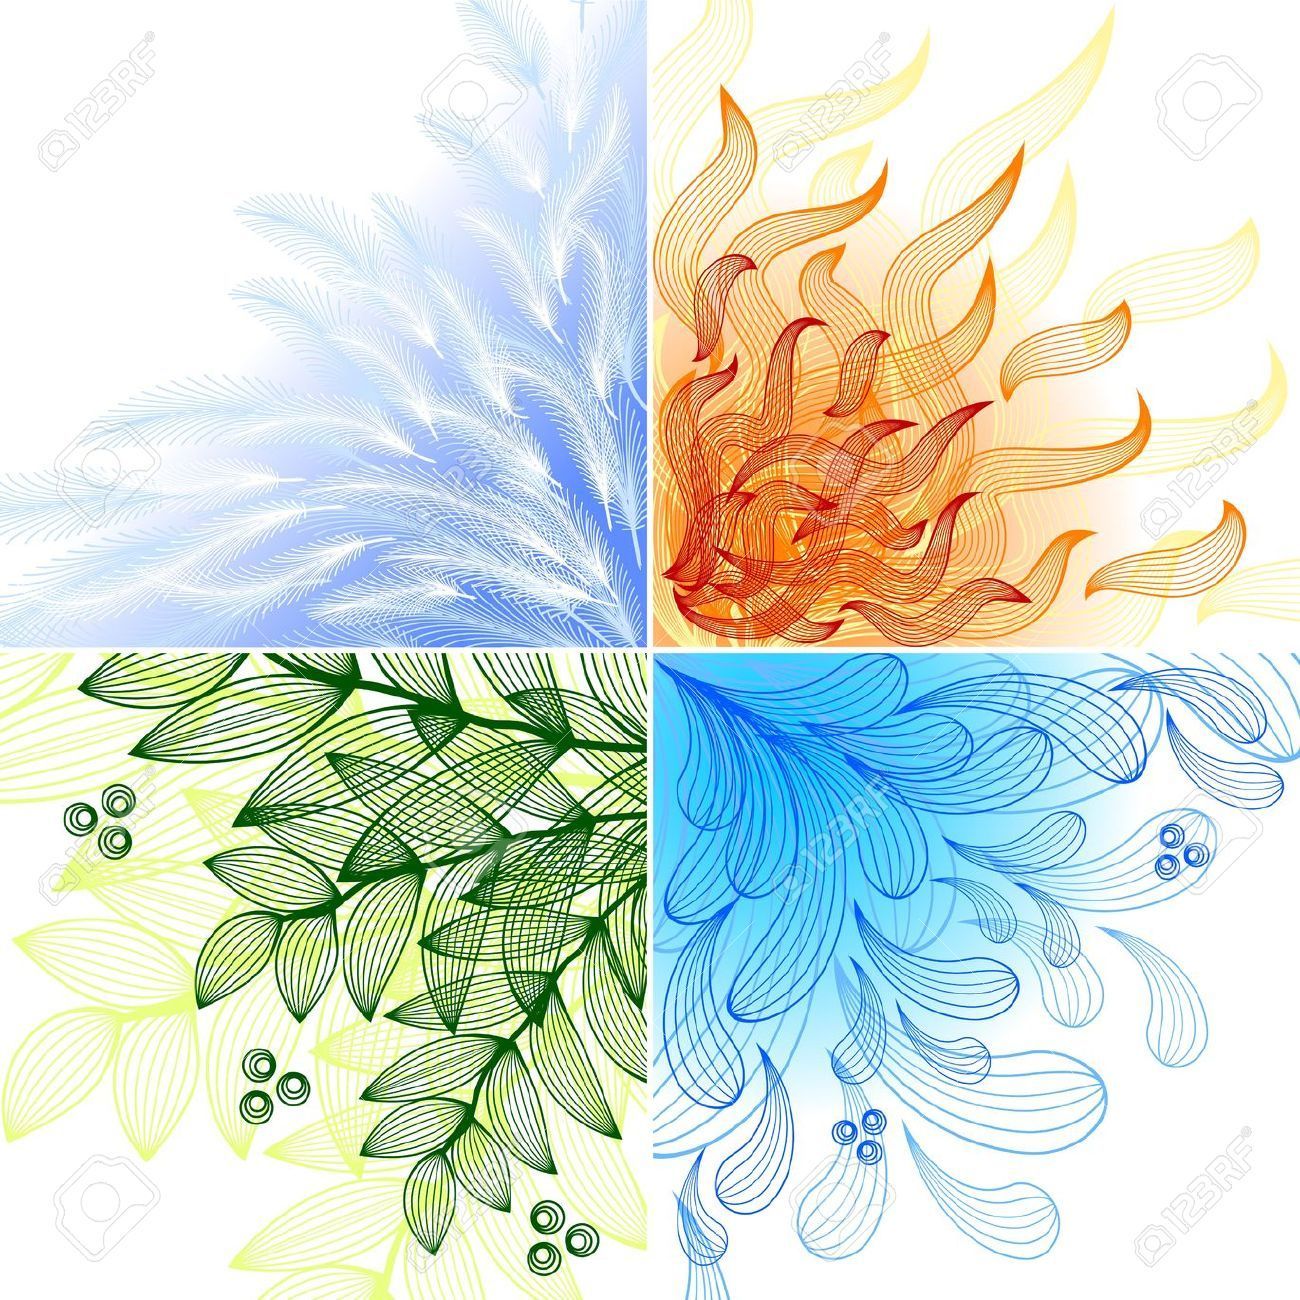 4 elements. Set of four beautiful backgrounds - 4 elements. Set of four beautiful backgrounds -   17 beauty Background drawings ideas